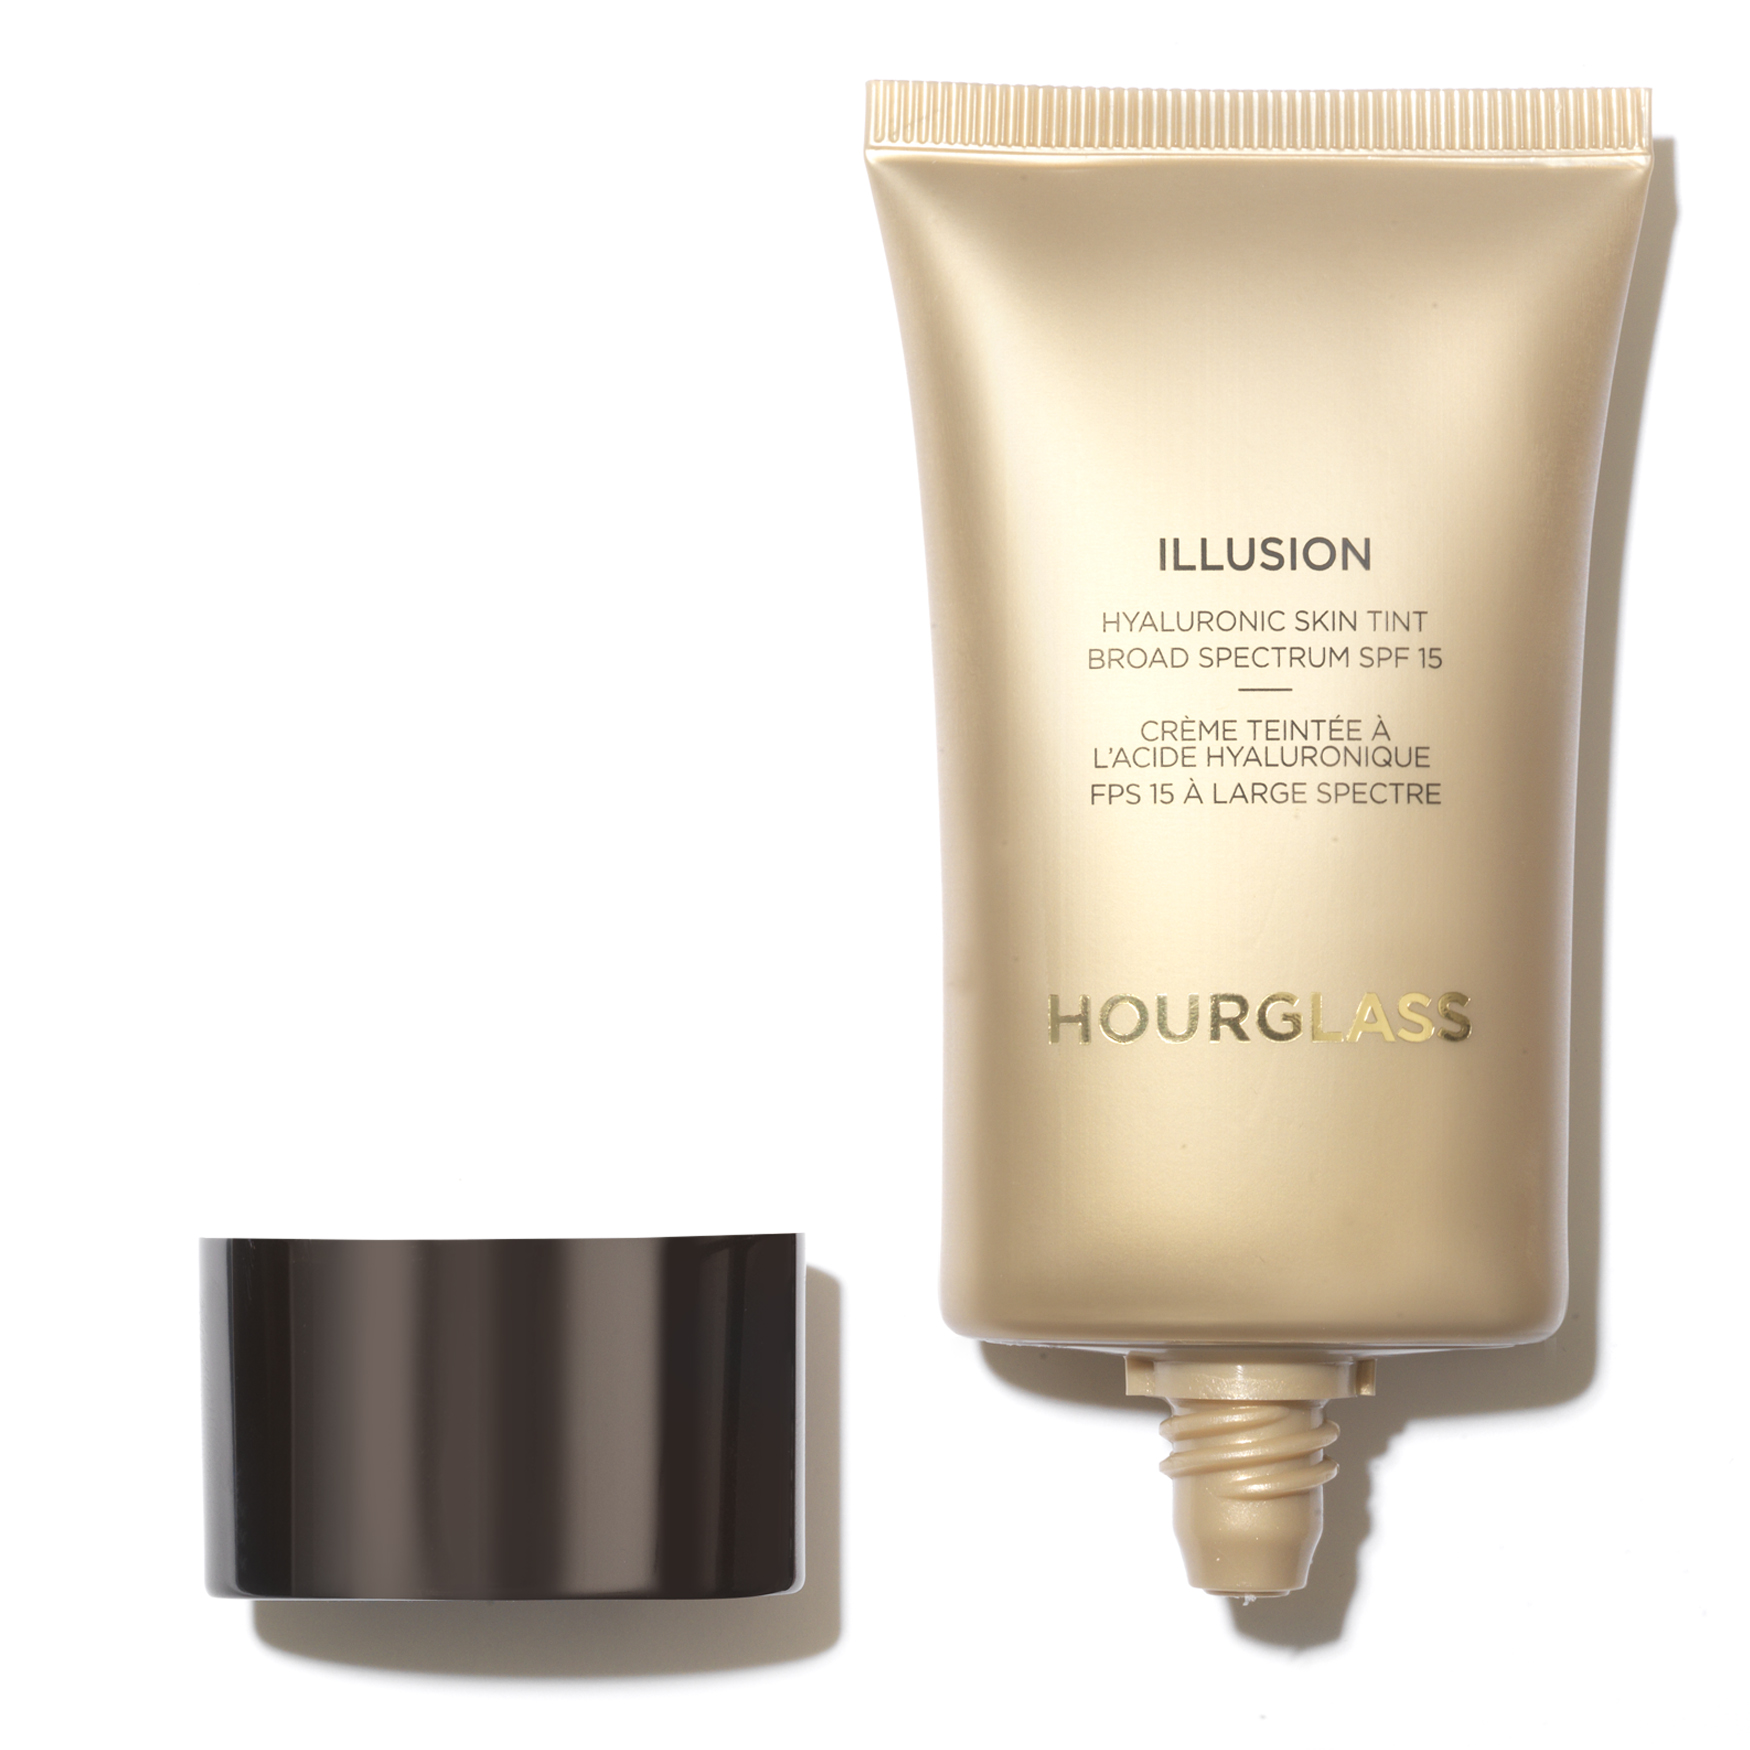 muerto Todos los años petrolero Hourglass Illusion Hyaluronic Skin Tint SPF15 | Space NK